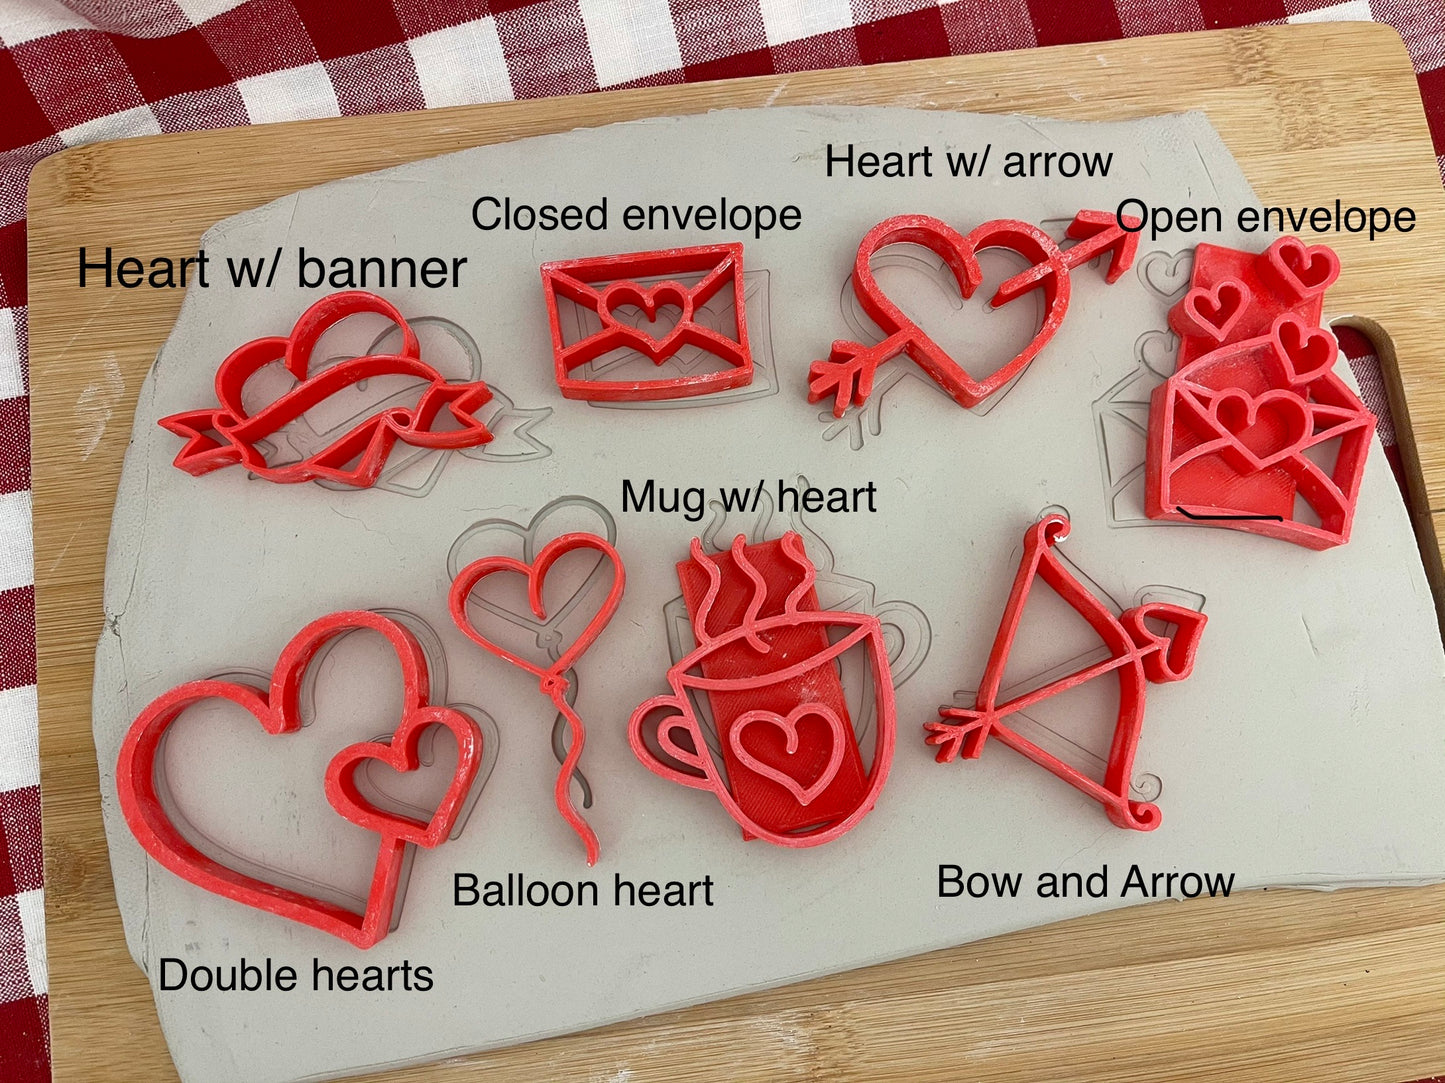 Pottery Stamp, Valentine Heart doodle designs, Each or Set - multiple sizes